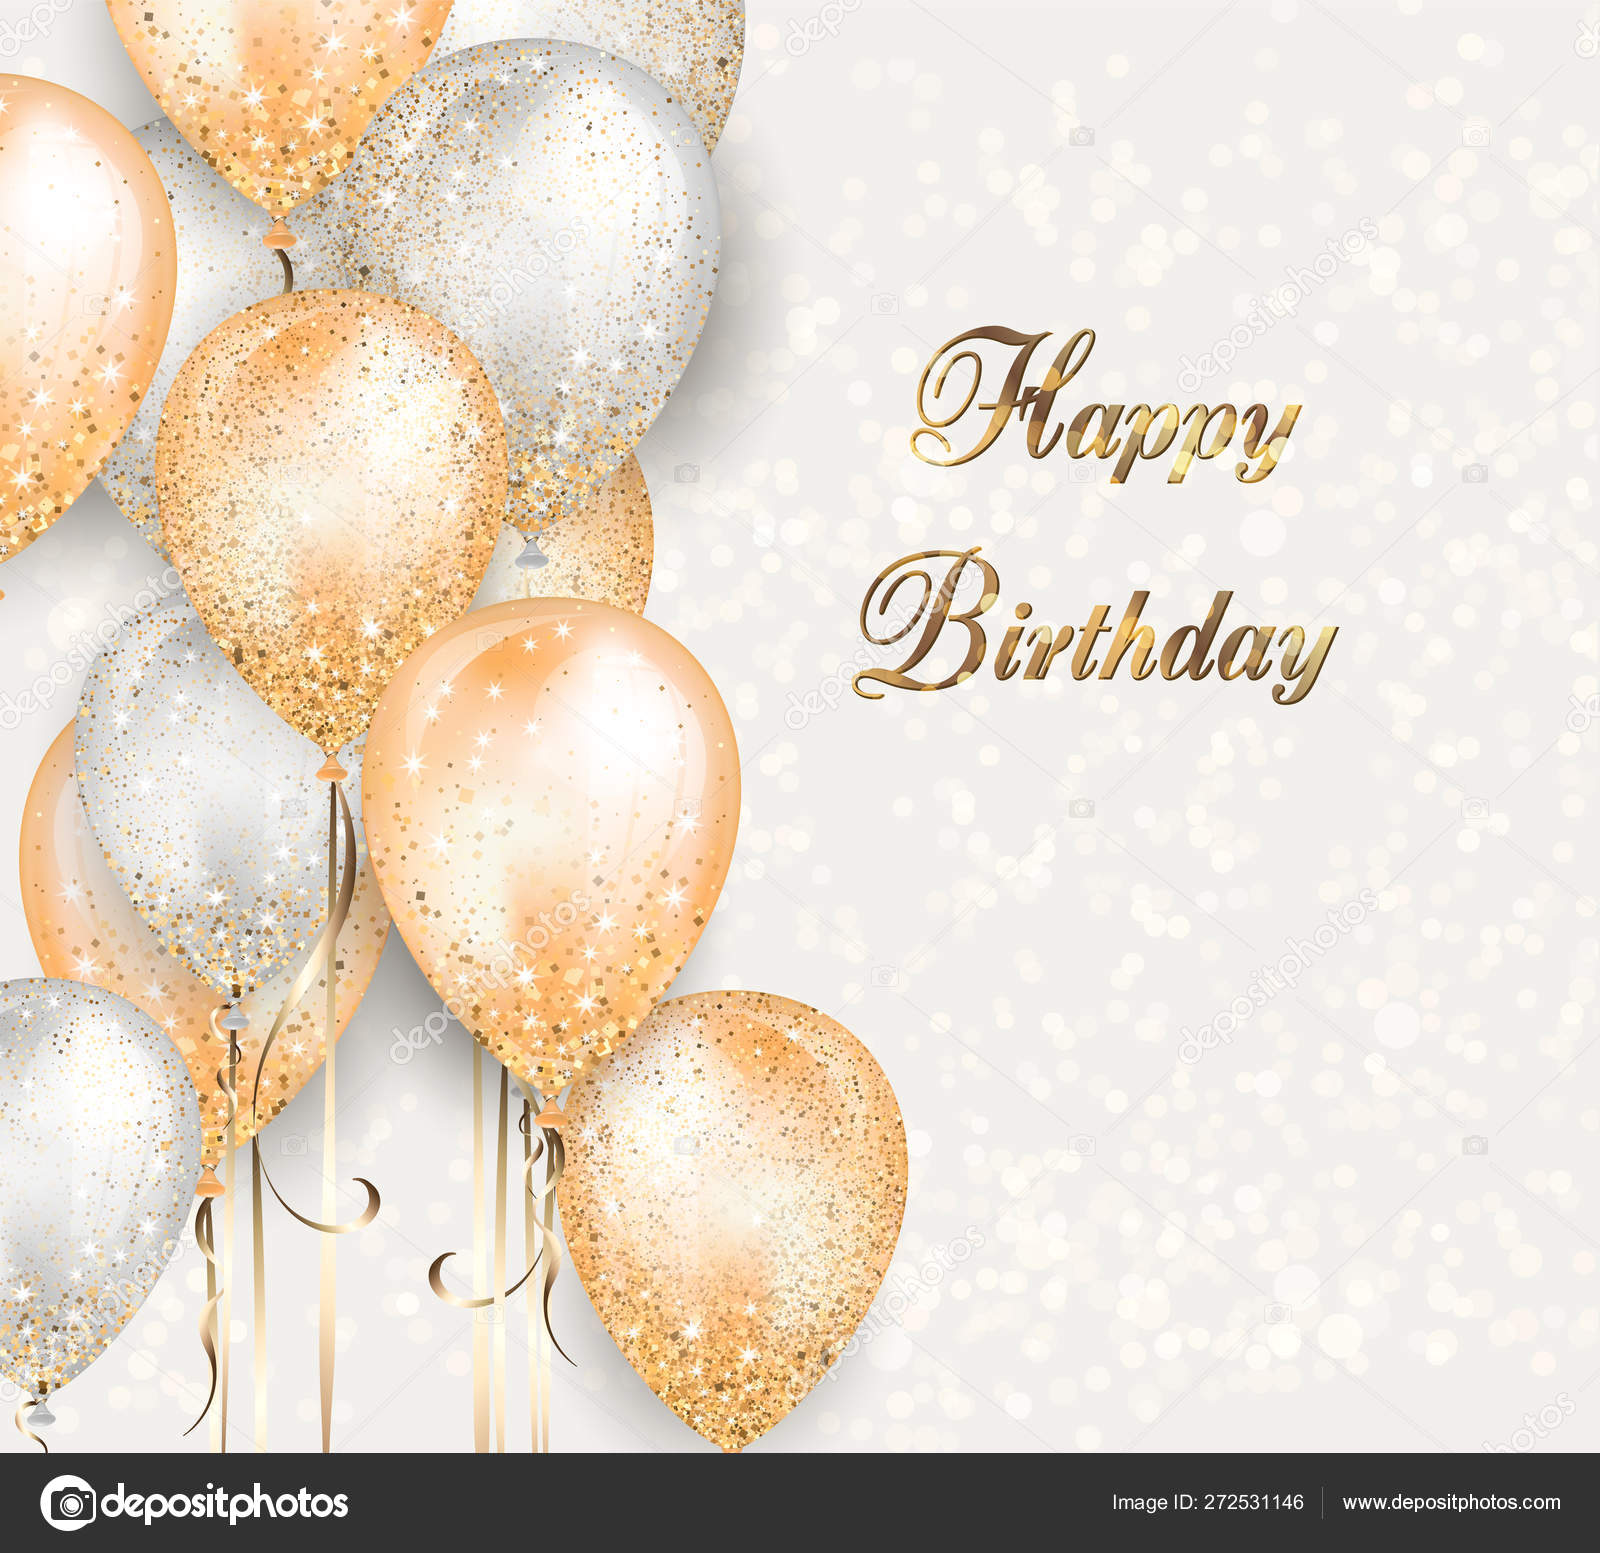 Glossy golden number balloon with hanging string Vector Image